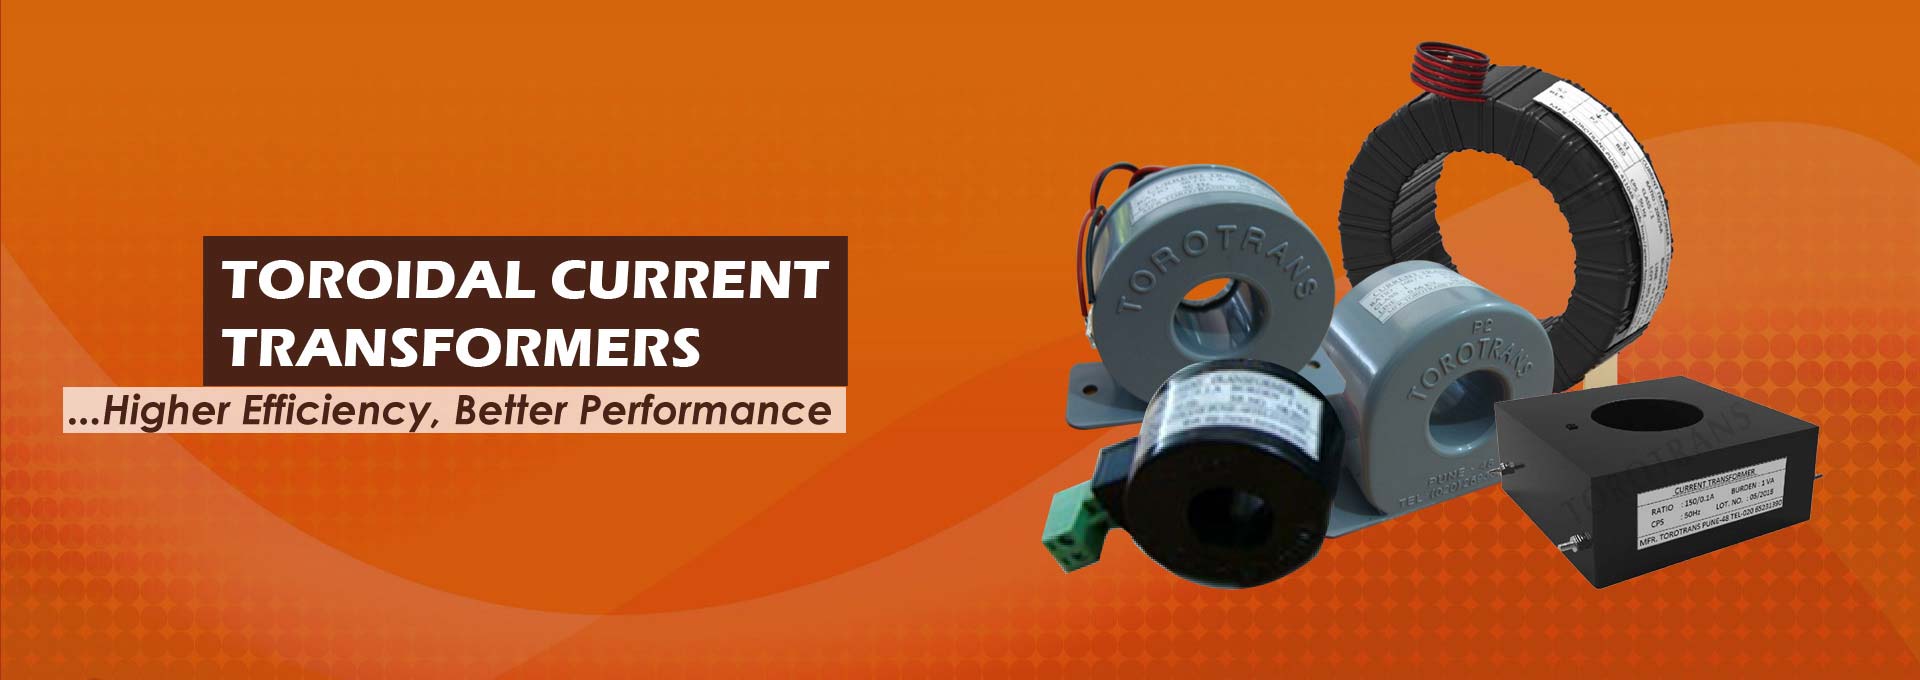 Measuring Current Transformers Suppliers